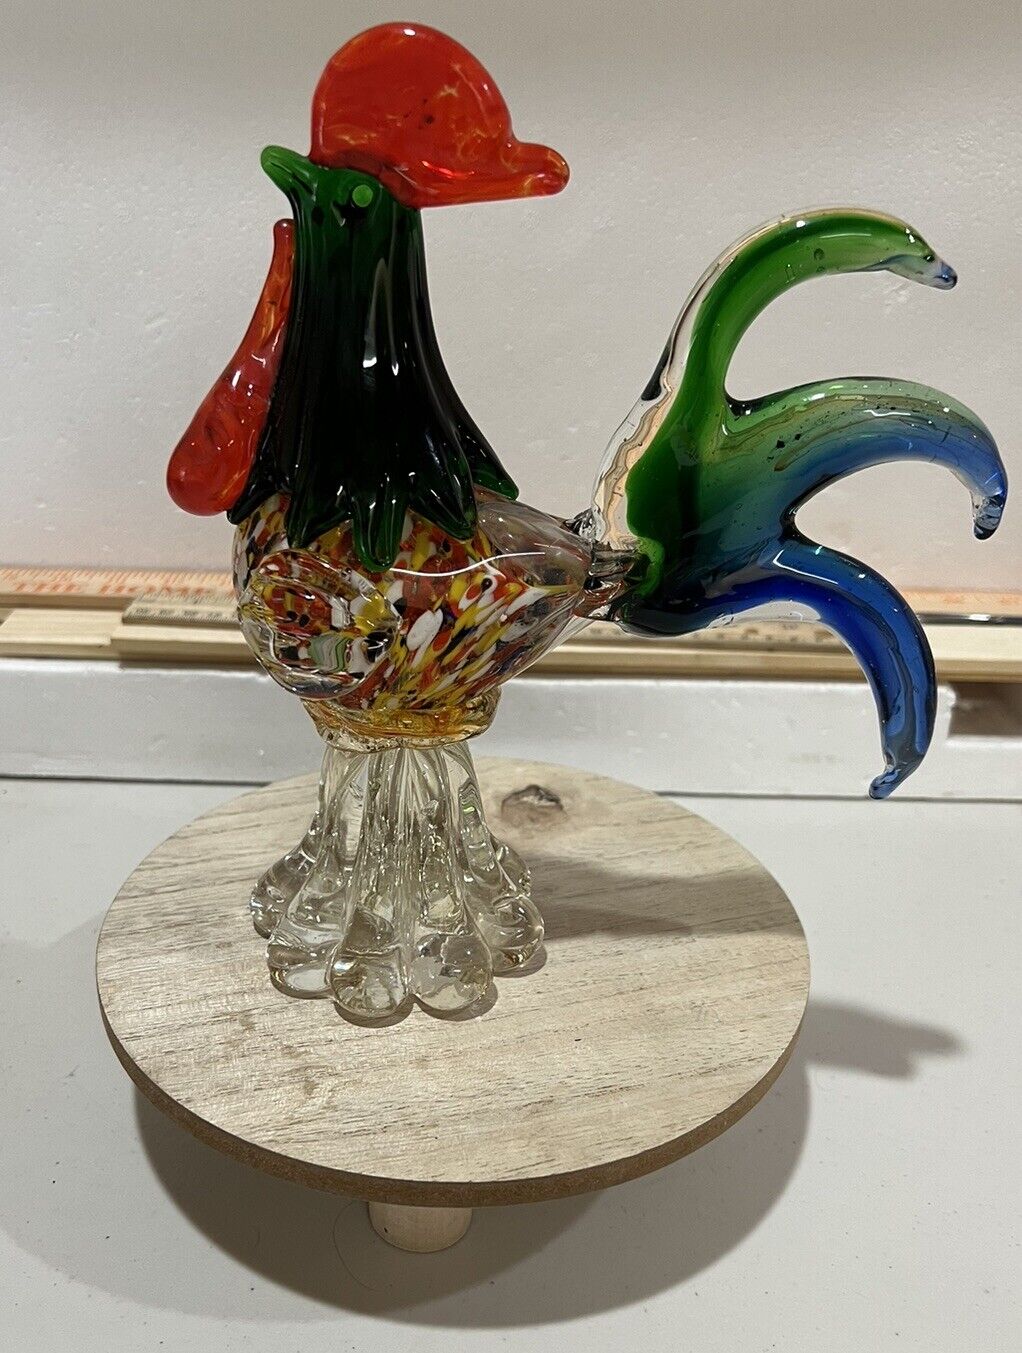 Heavy Art Glass Decor 8.75”T Confetti Rooster On Pedestal Bright and Colorful